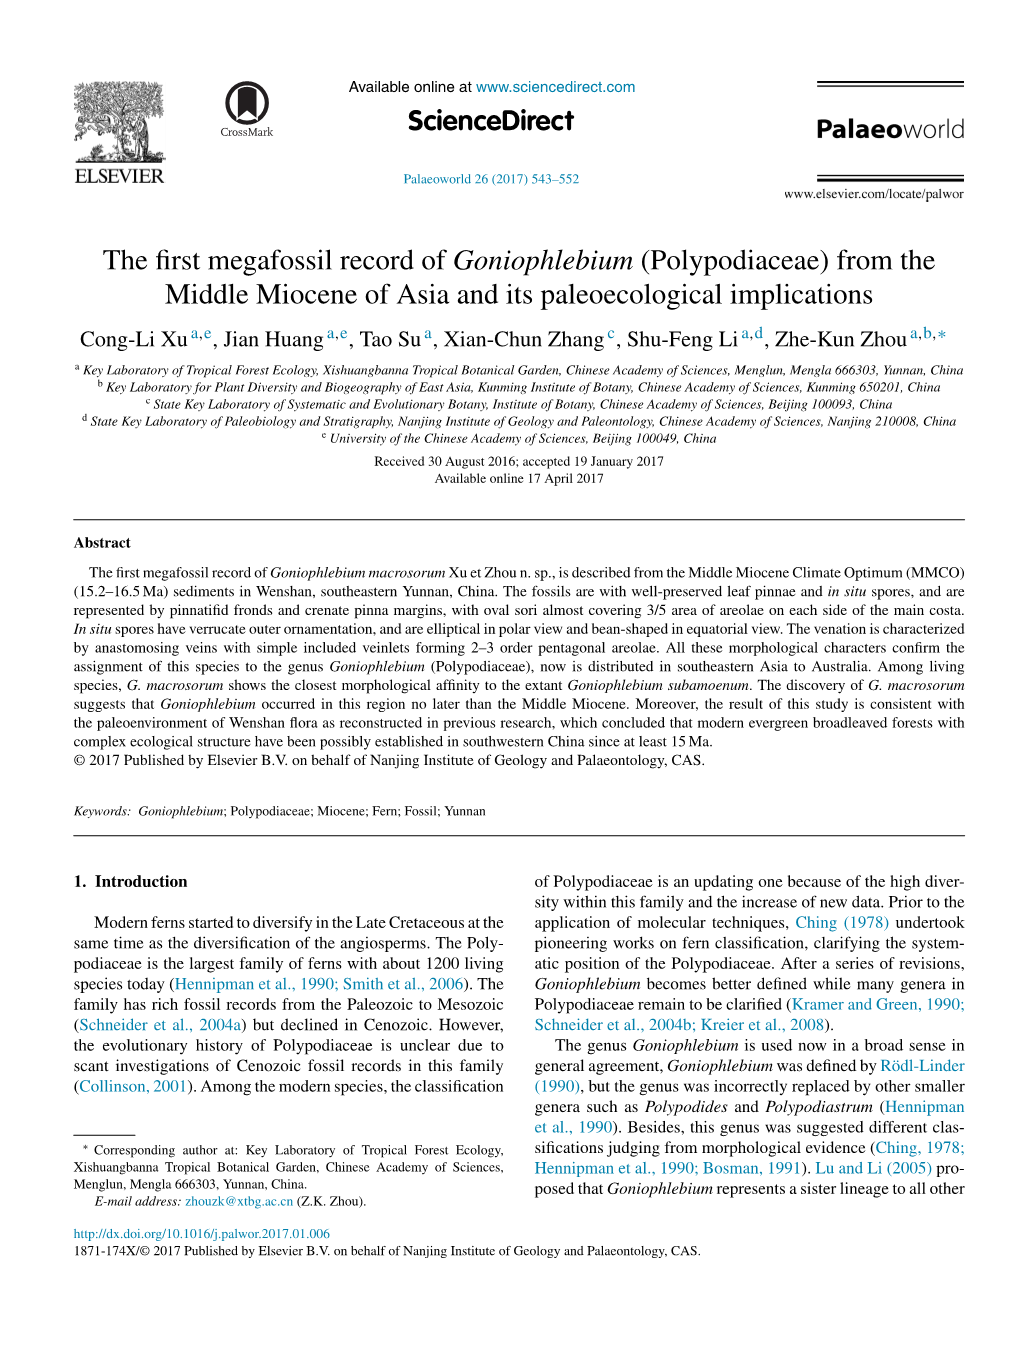 The First Megafossil Record of Goniophlebium (Polypodiaceae